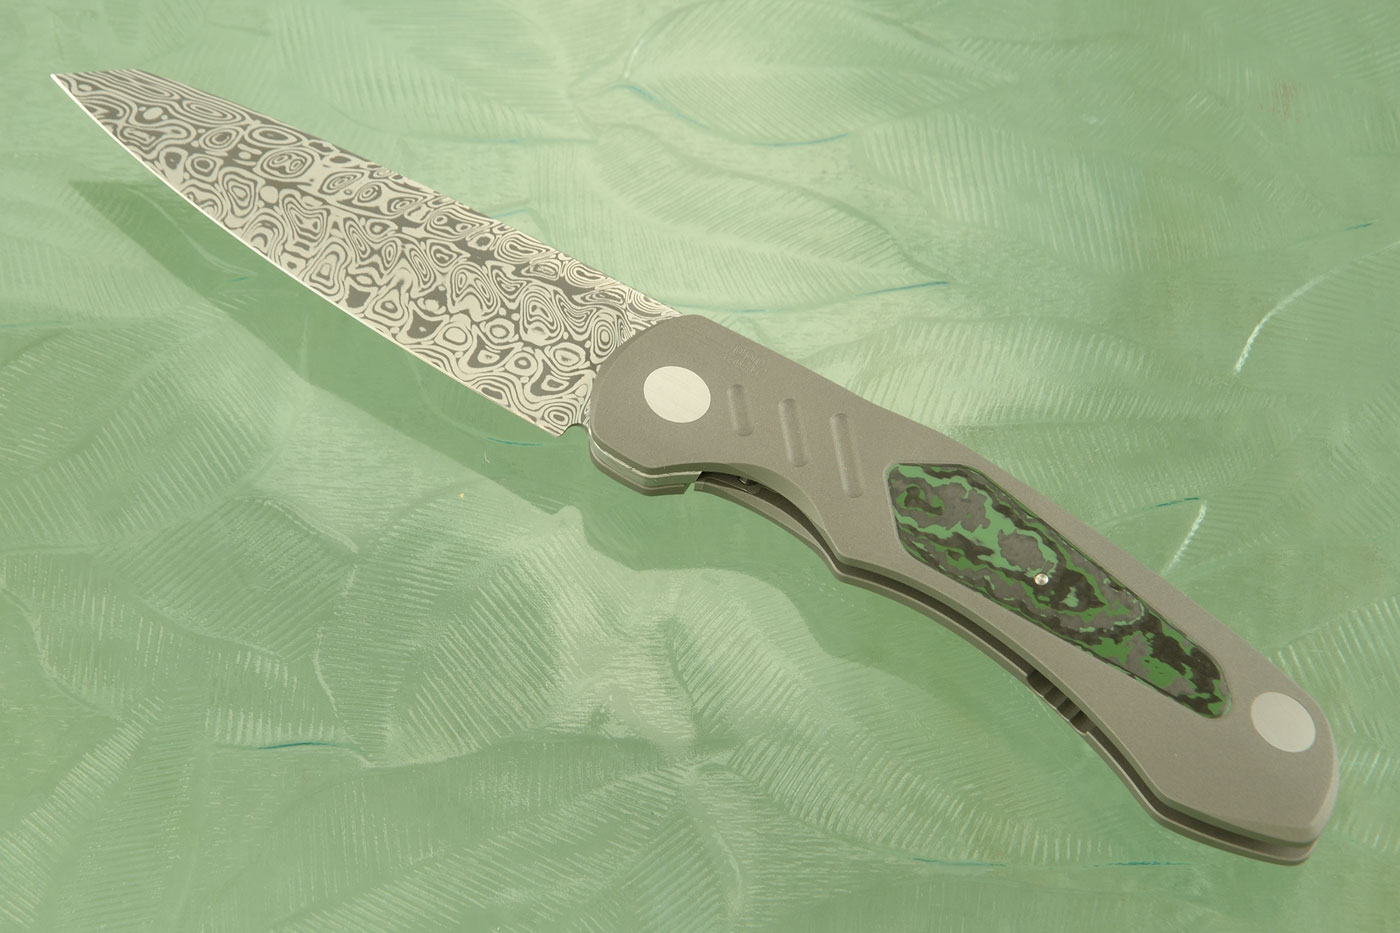 Viper Ex Front Flipper with Damasteel and Jungle Wear FatCarbon